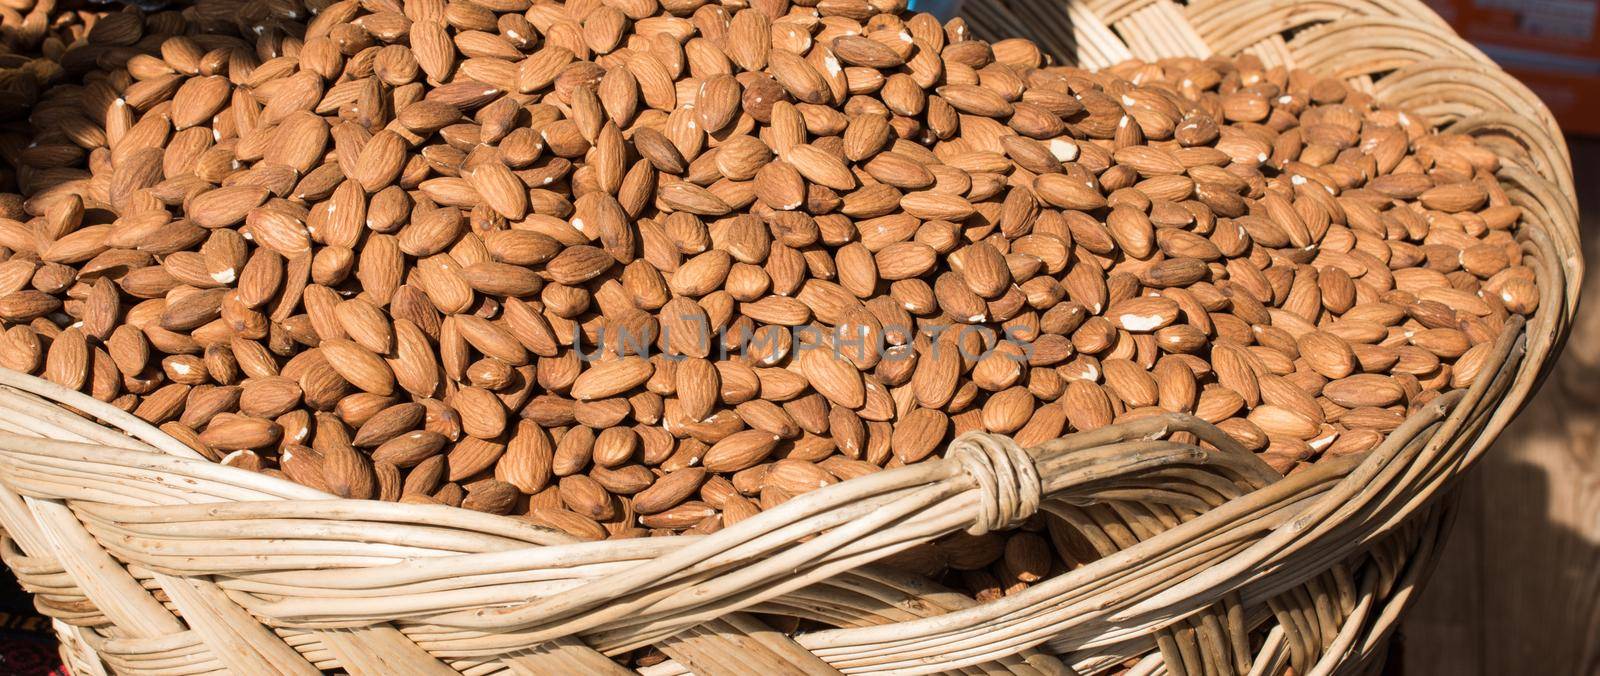 Shot Of Almonds For Sale In Market as background